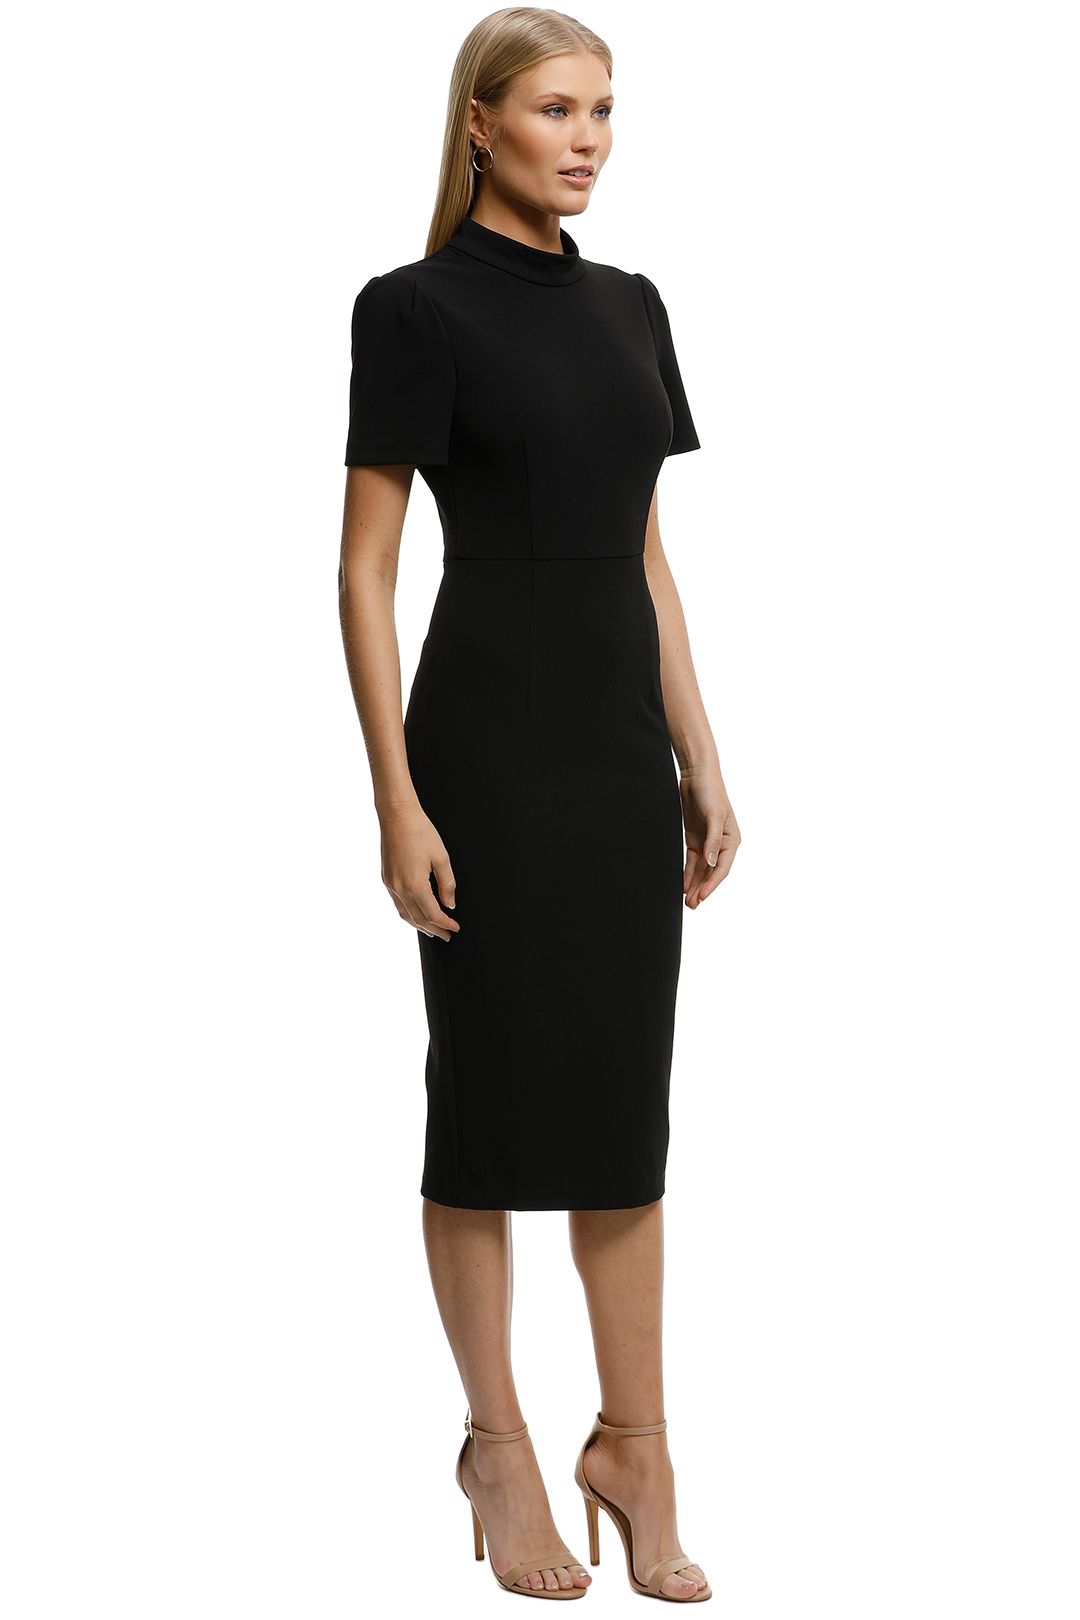 Mossman-A-Moment-In-Time-Dress-Black-Side